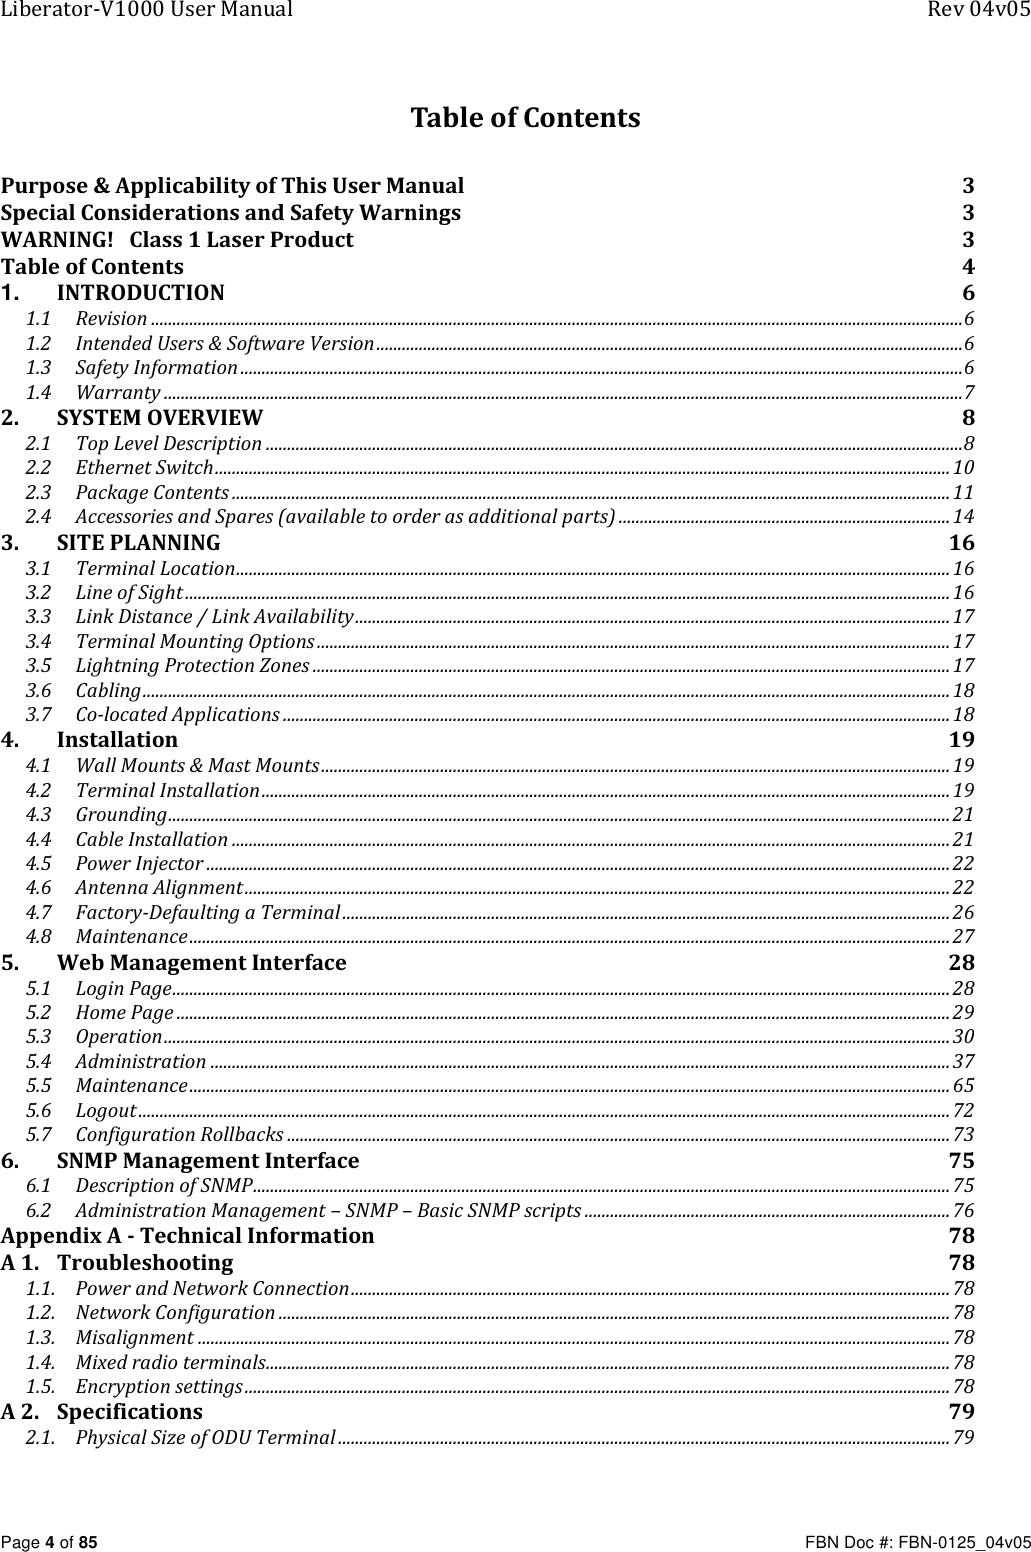 Liberator-V1000 User Manual  Rev 04v05     Page 4 of 85   FBN Doc #: FBN-0125_04v05 Table of Contents Purpose &amp; Applicability of This User Manual  3 Special Considerations and Safety Warnings  3 WARNING!   Class 1 Laser Product  3 Table of Contents  4 1. INTRODUCTION  6 1.1 Revision ............................................................................................................................................................................................... 6 1.2 Intended Users &amp; Software Version .......................................................................................................................................... 6 1.3 Safety Information .......................................................................................................................................................................... 6 1.4 Warranty ............................................................................................................................................................................................ 7 2. SYSTEM OVERVIEW  8 2.1 Top Level Description .................................................................................................................................................................... 8 2.2 Ethernet Switch ............................................................................................................................................................................. 10 2.3 Package Contents ......................................................................................................................................................................... 11 2.4 Accessories and Spares (available to order as additional parts) .............................................................................. 14 3. SITE PLANNING  16 3.1 Terminal Location ........................................................................................................................................................................ 16 3.2 Line of Sight .................................................................................................................................................................................... 16 3.3 Link Distance / Link Availability ............................................................................................................................................ 17 3.4 Terminal Mounting Options ..................................................................................................................................................... 17 3.5 Lightning Protection Zones ...................................................................................................................................................... 17 3.6 Cabling .............................................................................................................................................................................................. 18 3.7 Co-located Applications ............................................................................................................................................................. 18 4. Installation  19 4.1 Wall Mounts &amp; Mast Mounts .................................................................................................................................................... 19 4.2 Terminal Installation .................................................................................................................................................................. 19 4.3 Grounding ........................................................................................................................................................................................ 21 4.4 Cable Installation ......................................................................................................................................................................... 21 4.5 Power Injector ............................................................................................................................................................................... 22 4.6 Antenna Alignment ...................................................................................................................................................................... 22 4.7 Factory-Defaulting a Terminal ............................................................................................................................................... 26 4.8 Maintenance ................................................................................................................................................................................... 27 5. Web Management Interface  28 5.1 Login Page ....................................................................................................................................................................................... 28 5.2 Home Page ...................................................................................................................................................................................... 29 5.3 Operation ......................................................................................................................................................................................... 30 5.4 Administration .............................................................................................................................................................................. 37 5.5 Maintenance ................................................................................................................................................................................... 65 5.6 Logout ............................................................................................................................................................................................... 72 5.7 Configuration Rollbacks ............................................................................................................................................................ 73 6. SNMP Management Interface  75 6.1 Description of SNMP .................................................................................................................................................................... 75 6.2 Administration Management – SNMP – Basic SNMP scripts ...................................................................................... 76 Appendix A - Technical Information  78 A 1. Troubleshooting  78 1.1. Power and Network Connection ............................................................................................................................................. 78 1.2. Network Configuration .............................................................................................................................................................. 78 1.3. Misalignment ................................................................................................................................................................................. 78 1.4. Mixed radio terminals................................................................................................................................................................. 78 1.5. Encryption settings ...................................................................................................................................................................... 78 A 2. Specifications  79 2.1. Physical Size of ODU Terminal ................................................................................................................................................ 79 